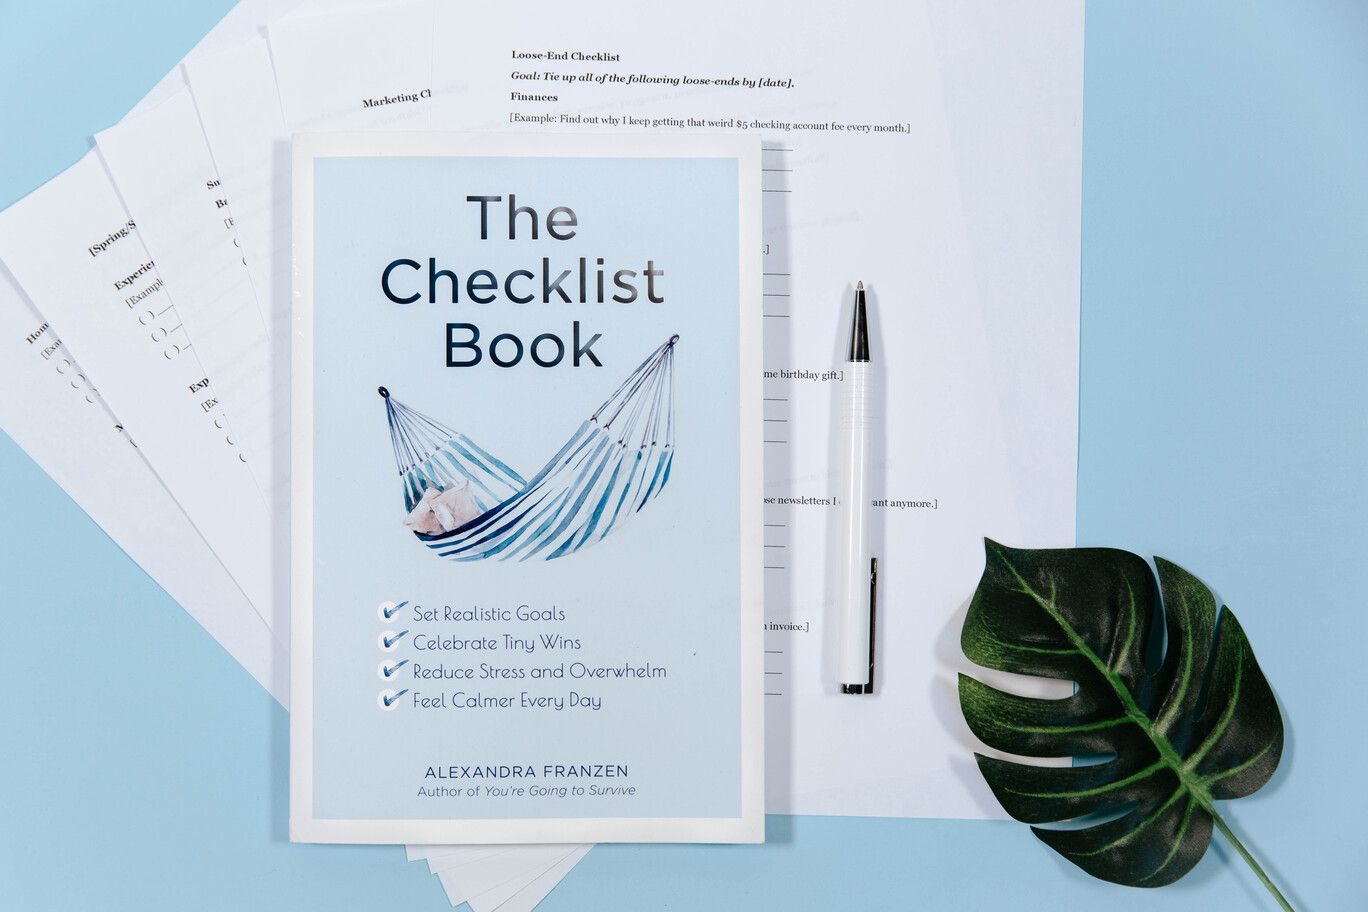 The Checklist Book: Set Realistic Goals, Celebrate Tiny Wins, Reduce Stress and Overwhelm, and Feel Calmer Every Day.